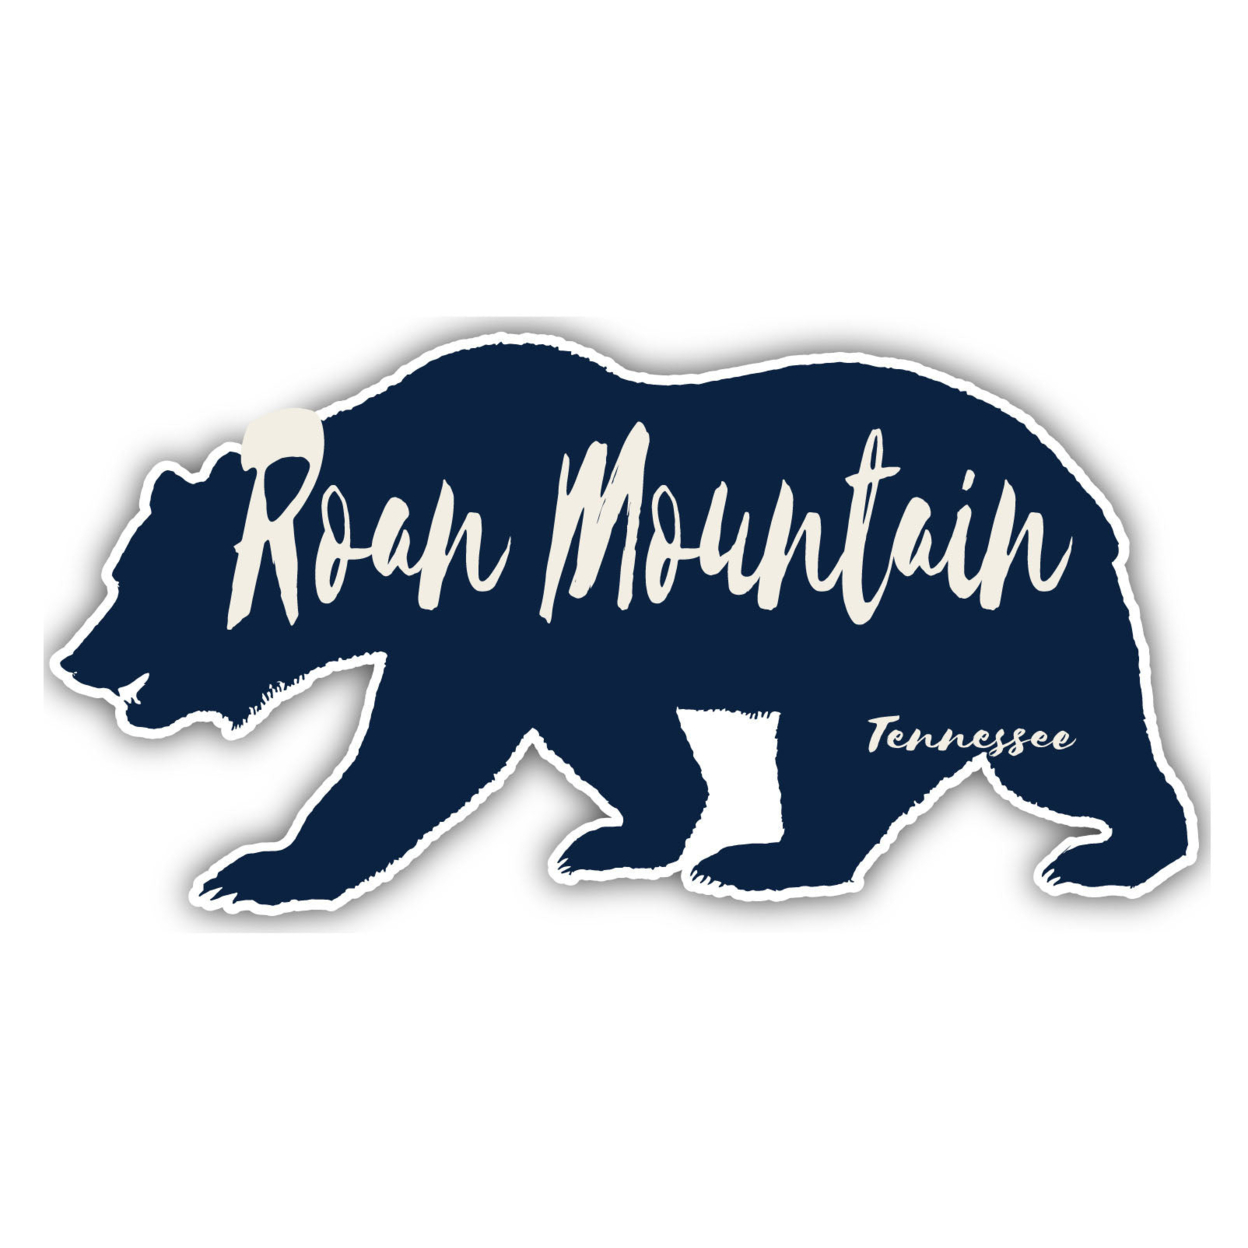 Roan Mountain Tennessee Souvenir Decorative Stickers (Choose Theme And Size) - Single Unit, 4-Inch, Bear